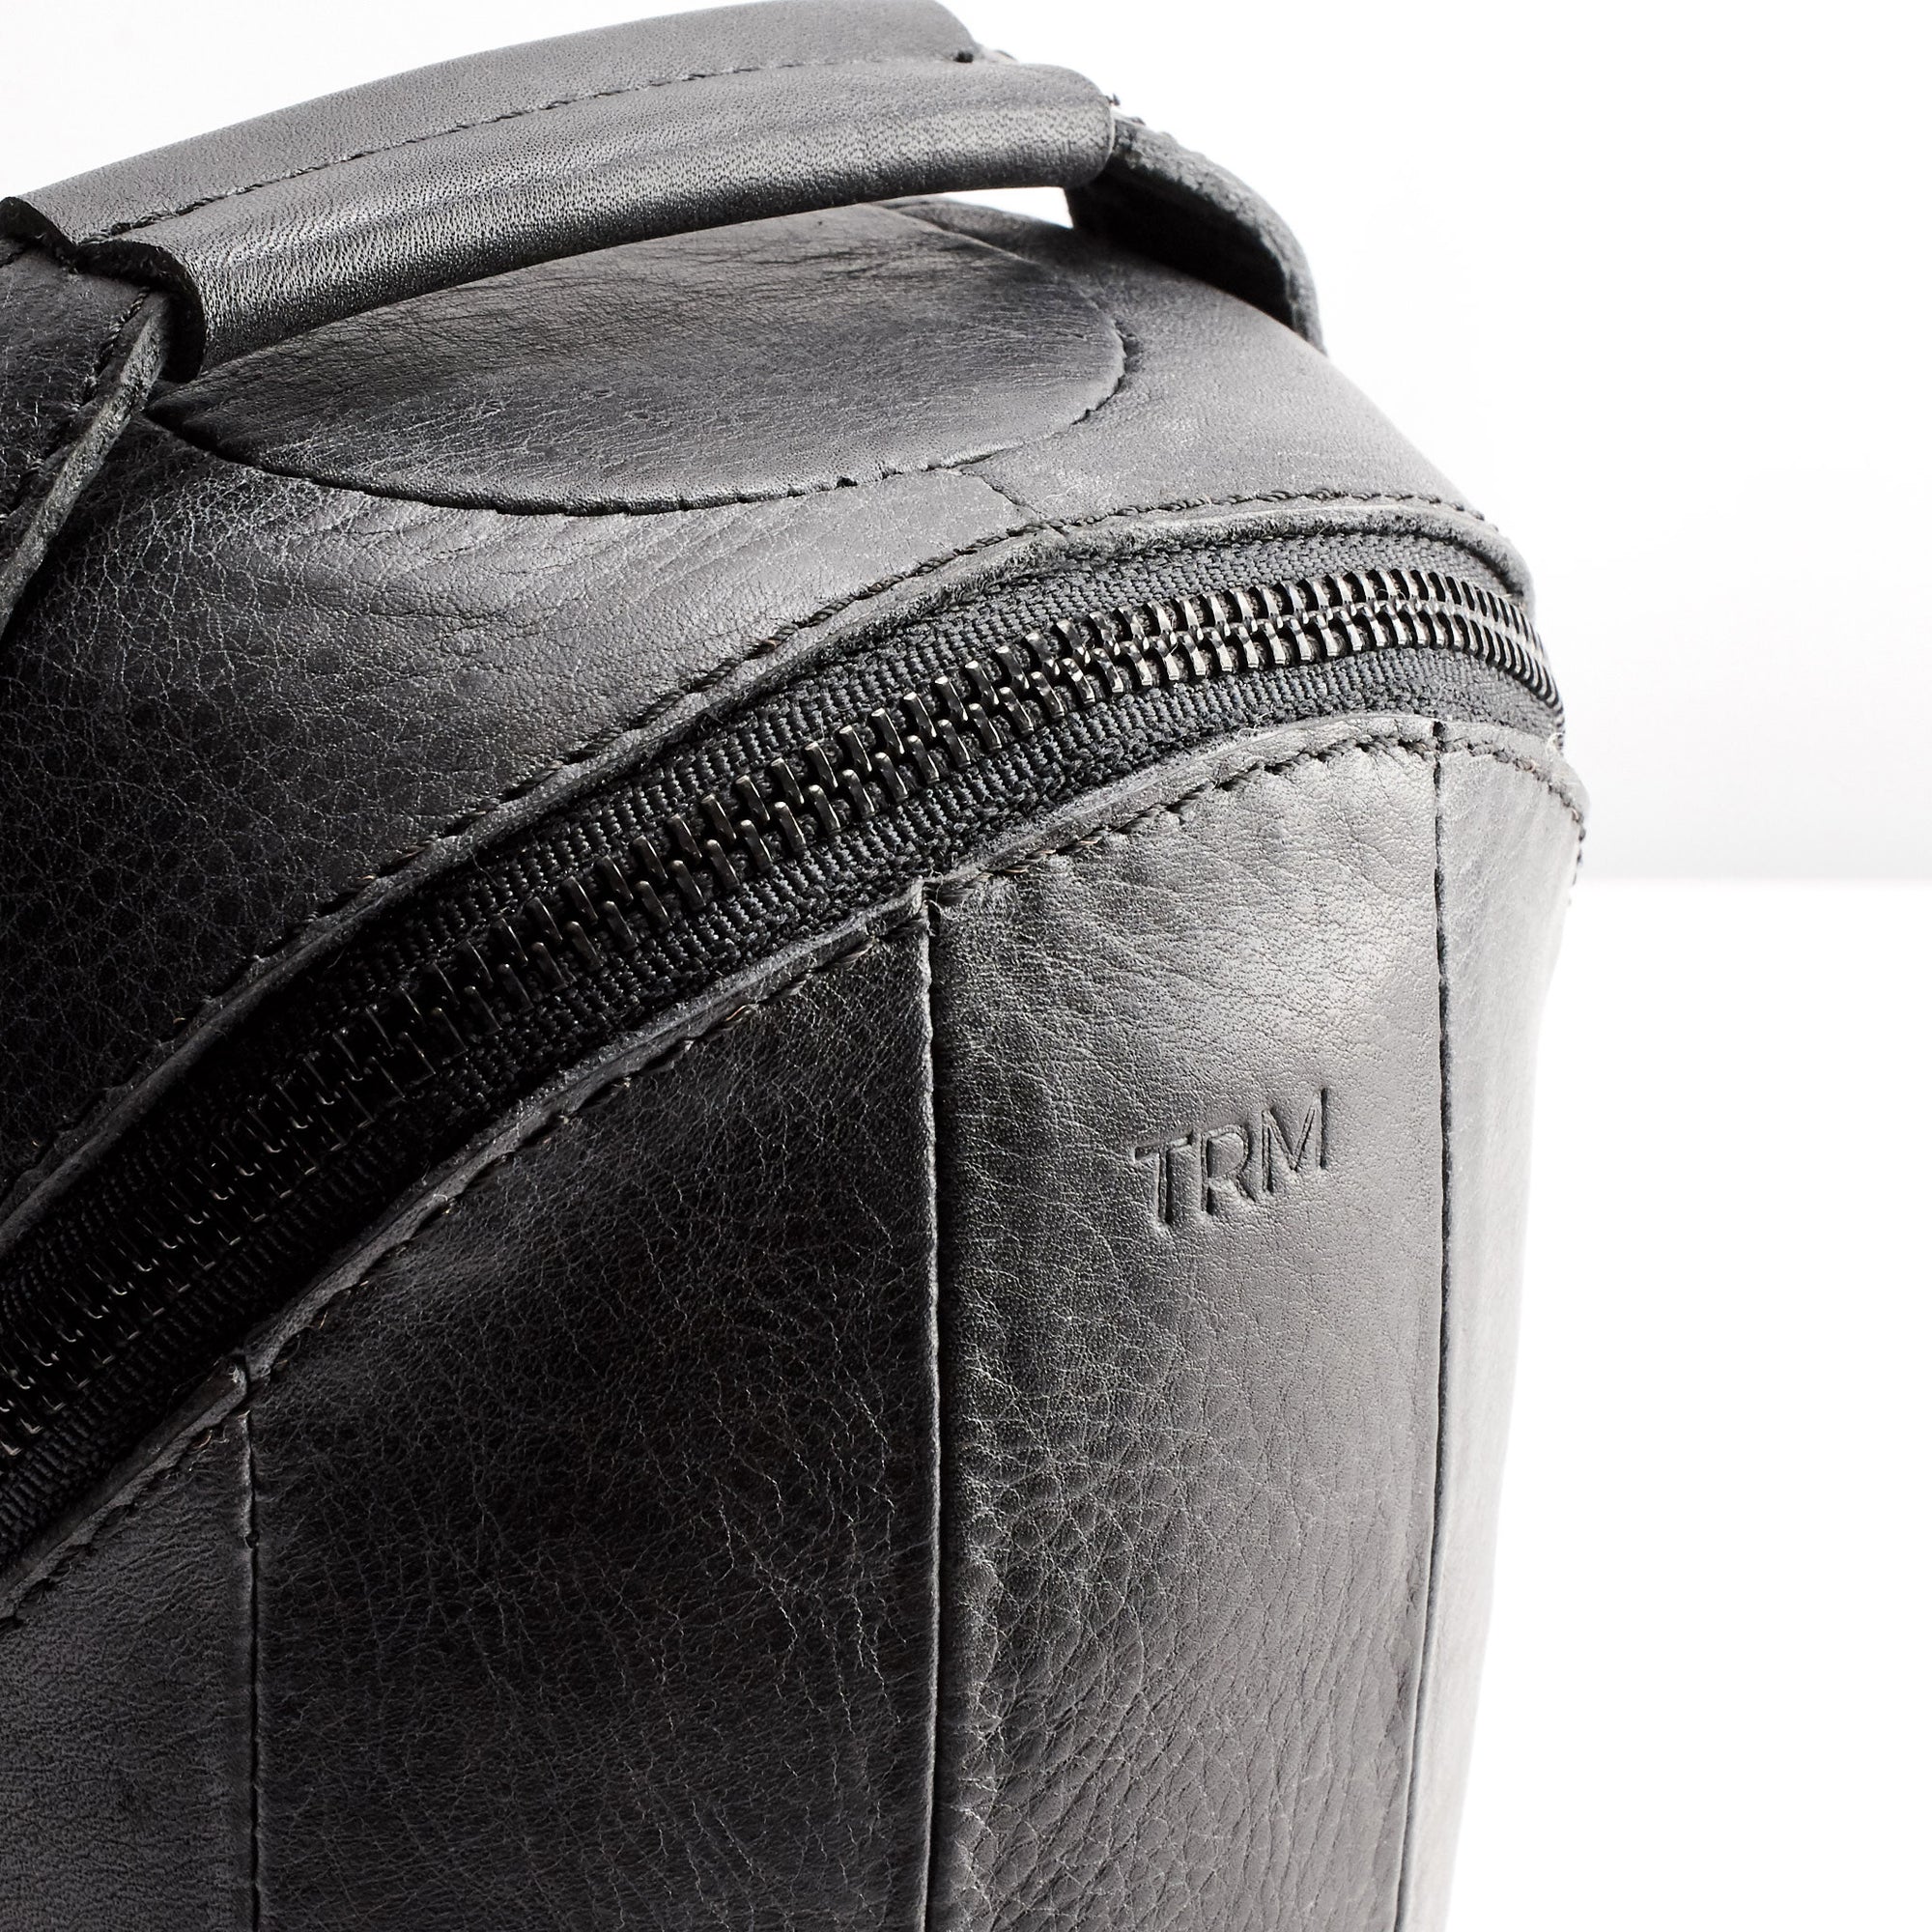 Custom monogrammed leather sleeve. HomePod black leather travel carrying case.